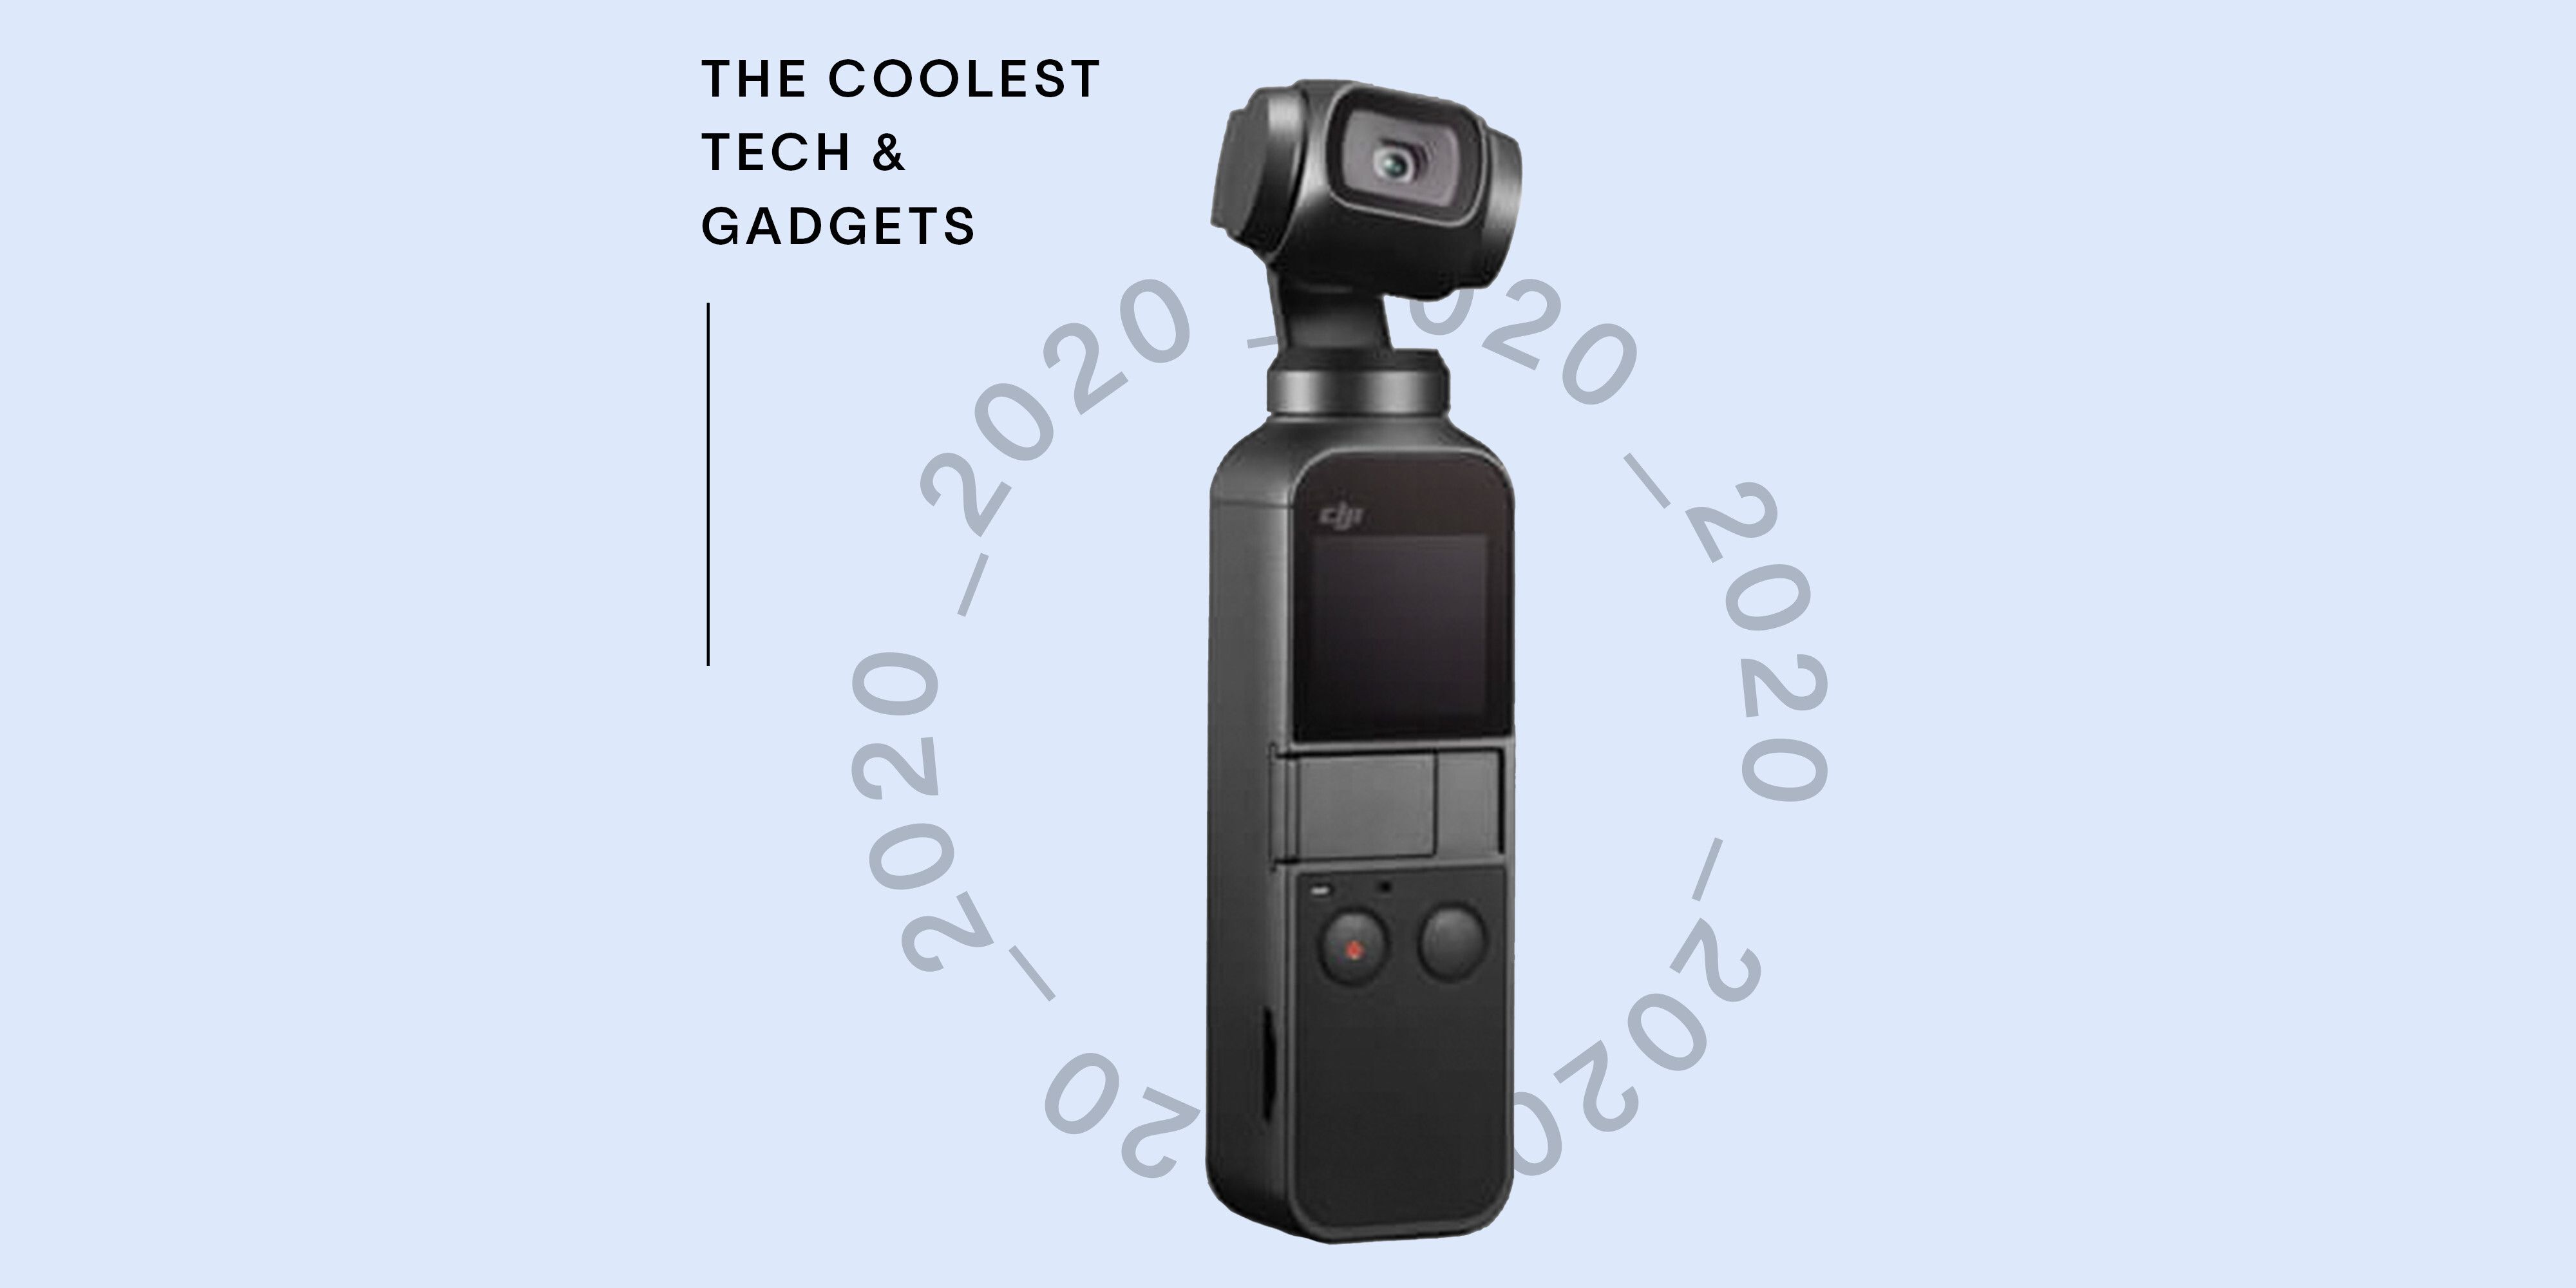 27 Cool Tech Gadgets 2020 - Best New Tech Products in 2020